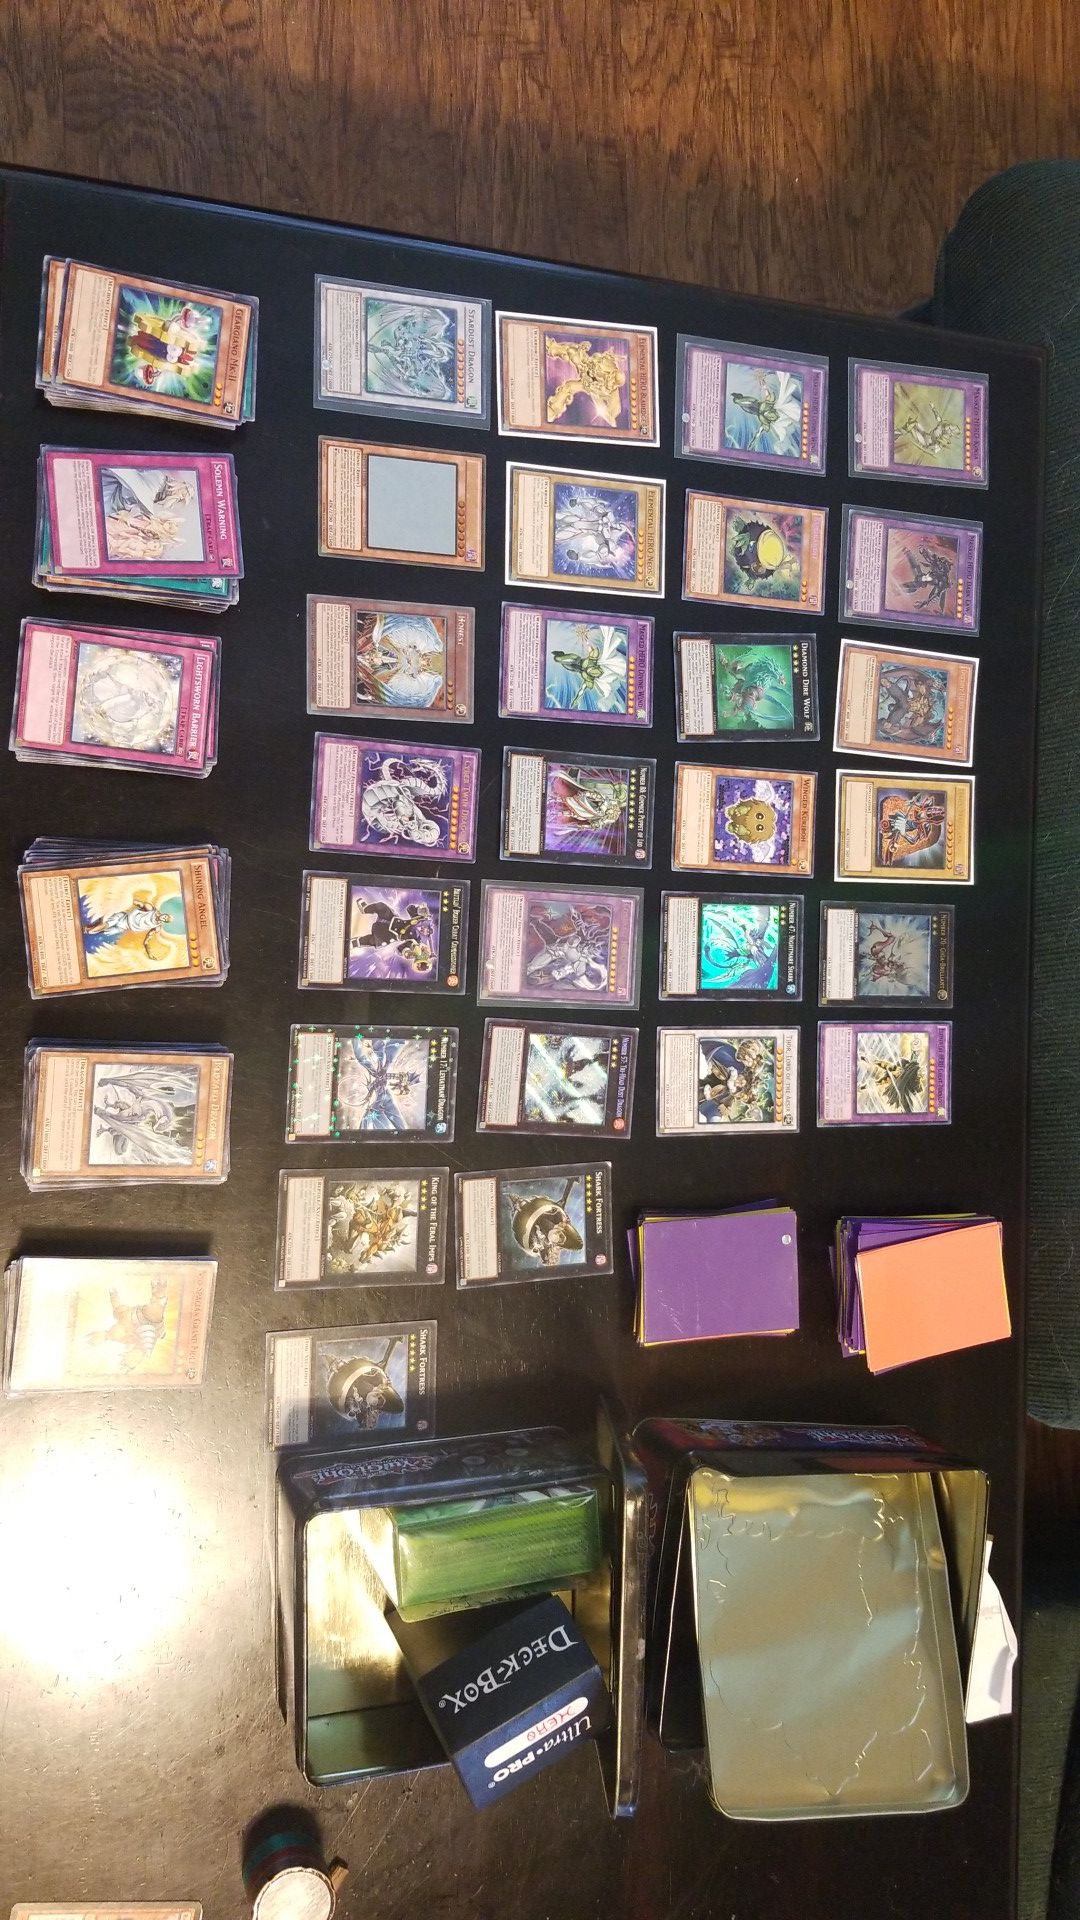 Yugioh cards w/sleeves, deck boxes, and tin cases